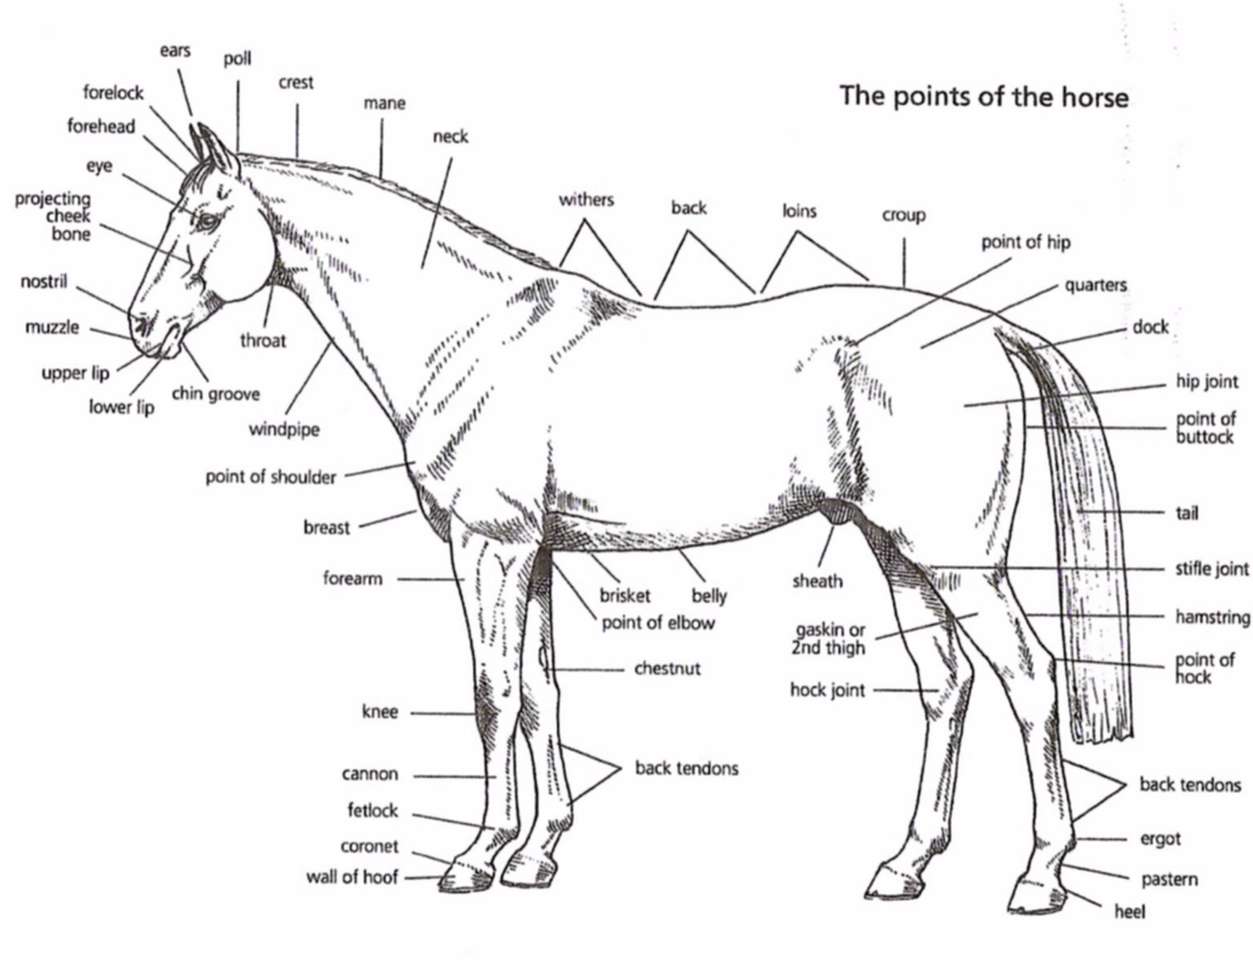 Points of a Horse puzzle online from photo